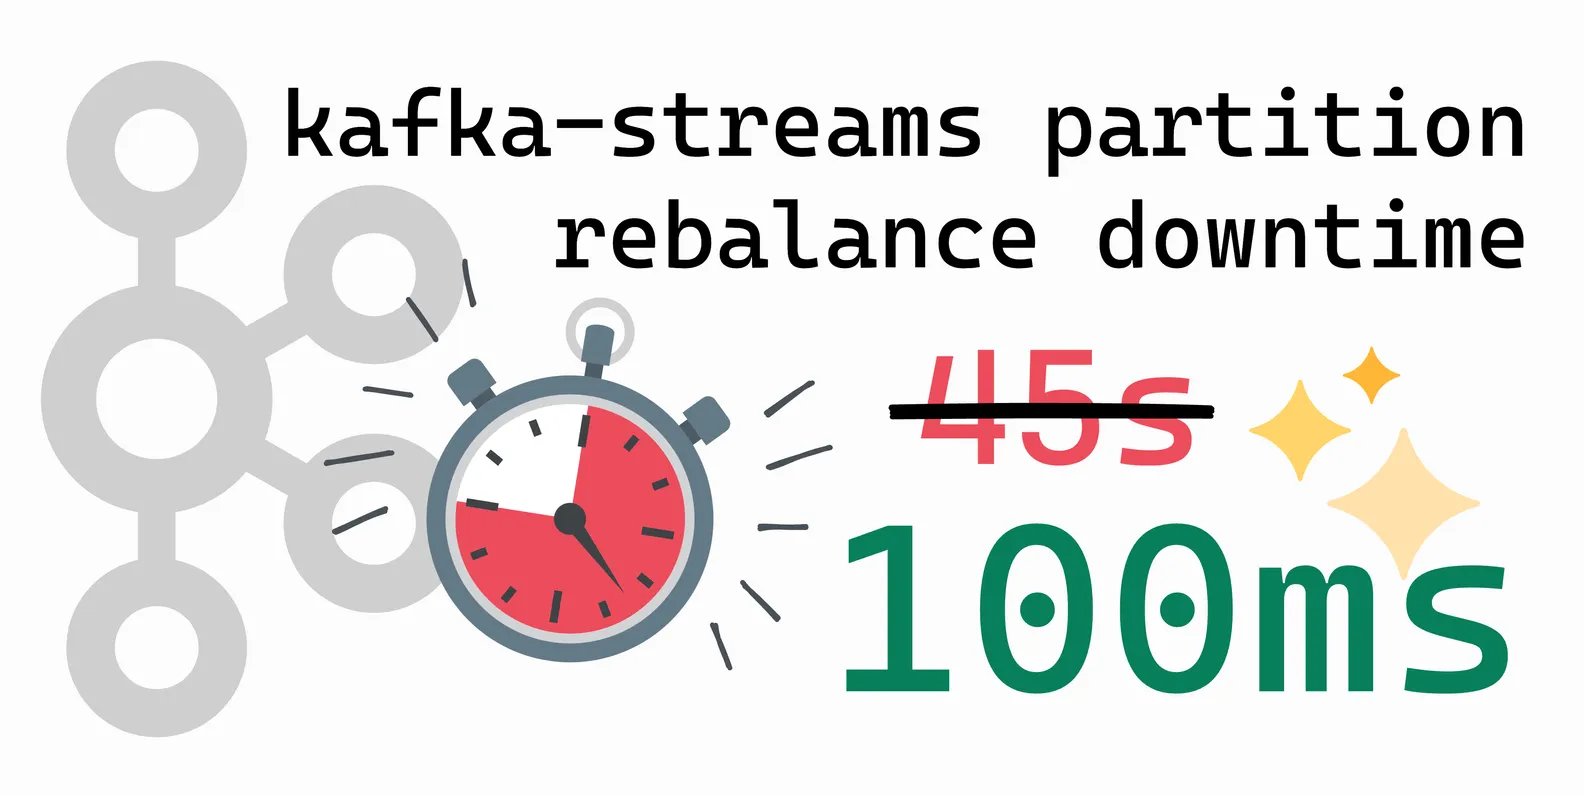 Cover image showing the Kafka log, a stopwatch, suggesting 'kafka-streams partition rebalance downtime' to be reduced from 45s to 100ms